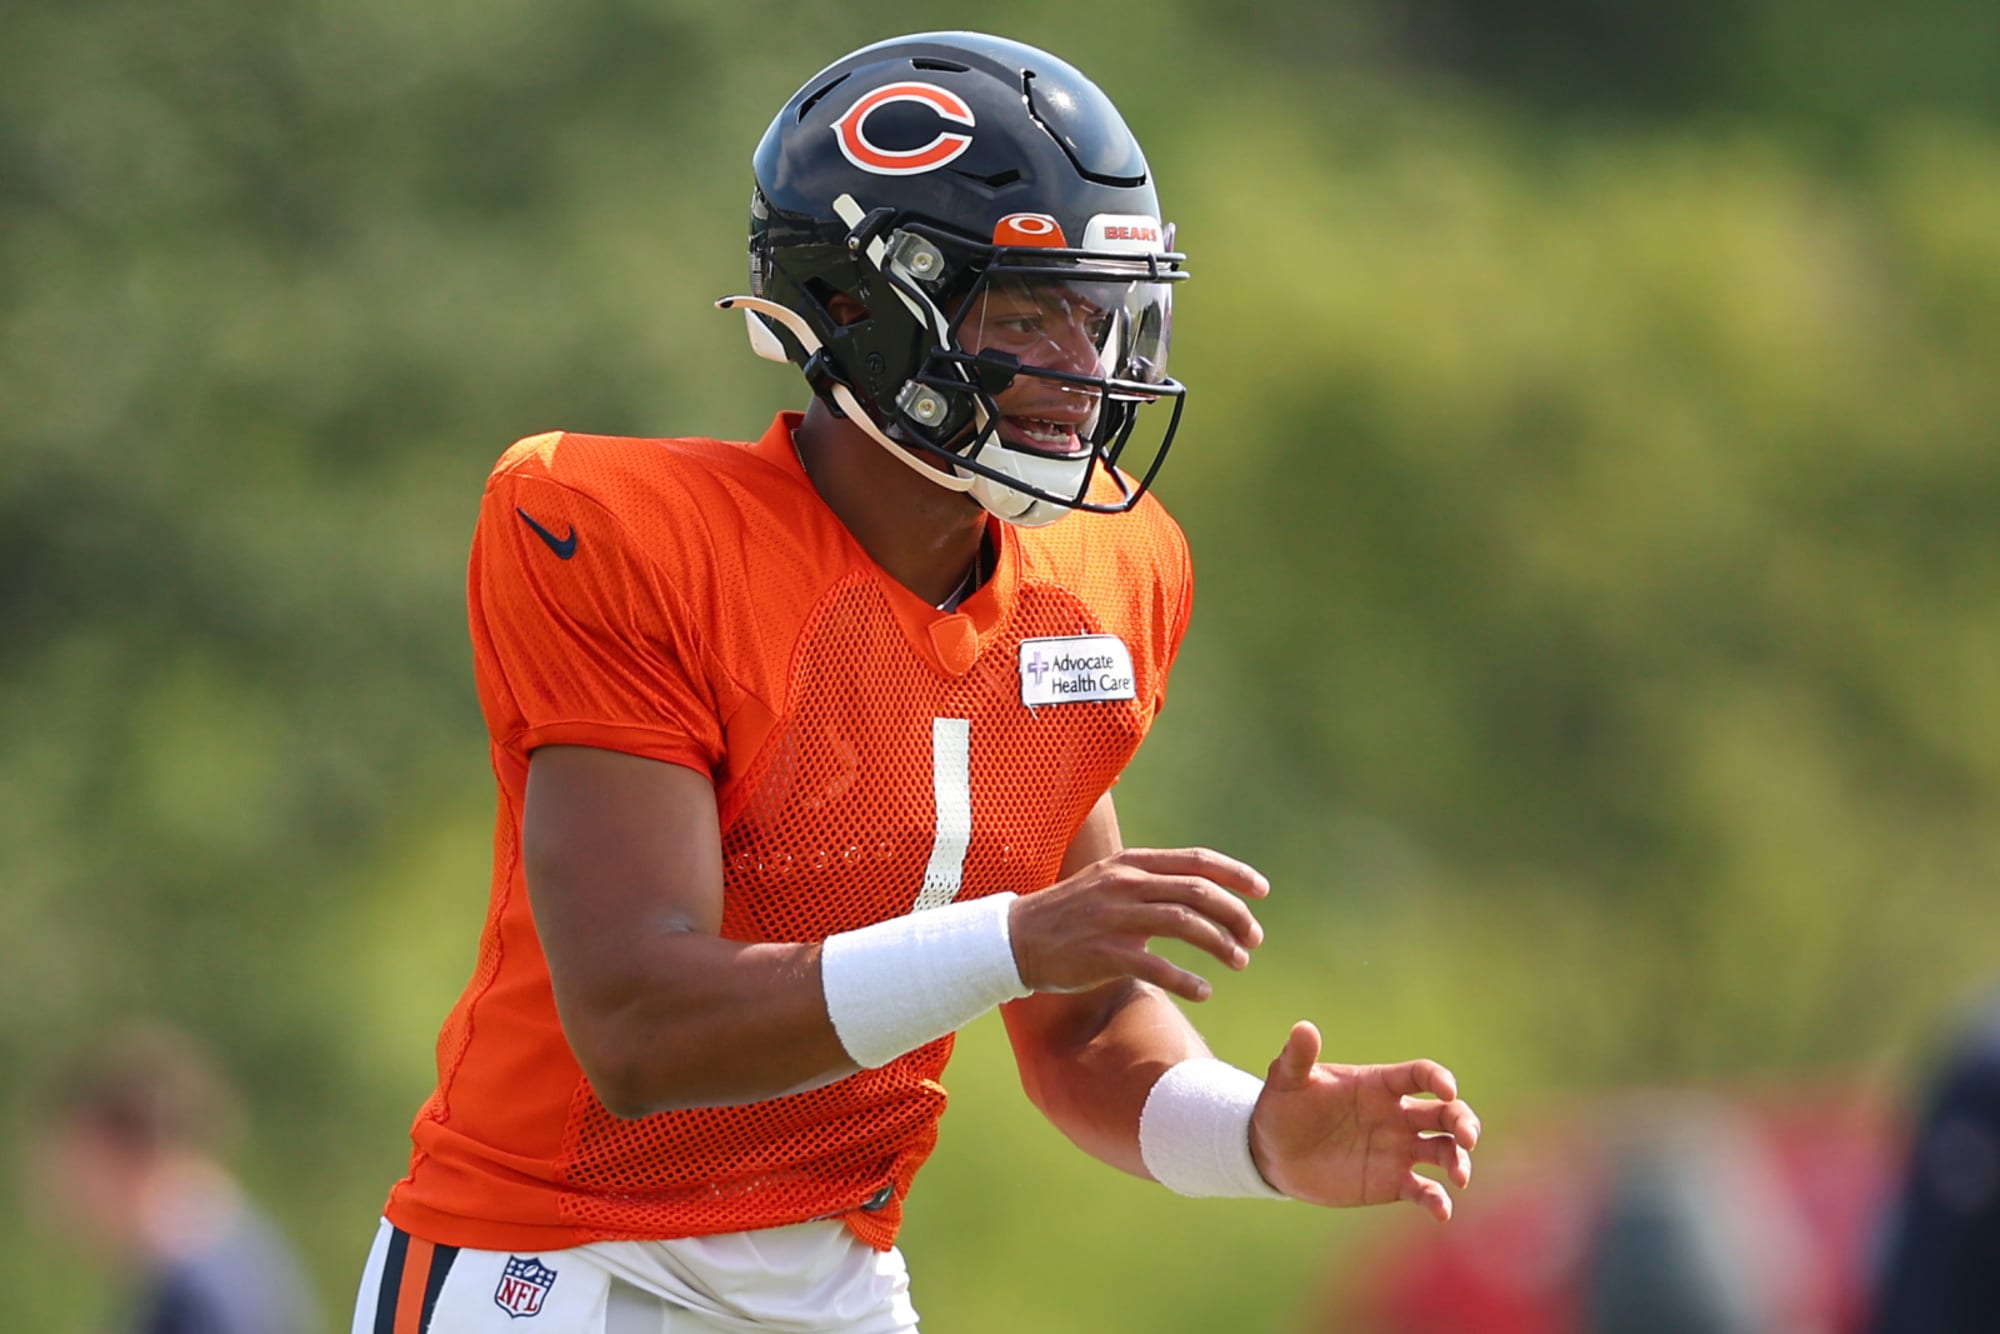 Chicago Bears practice is completely different under new regime